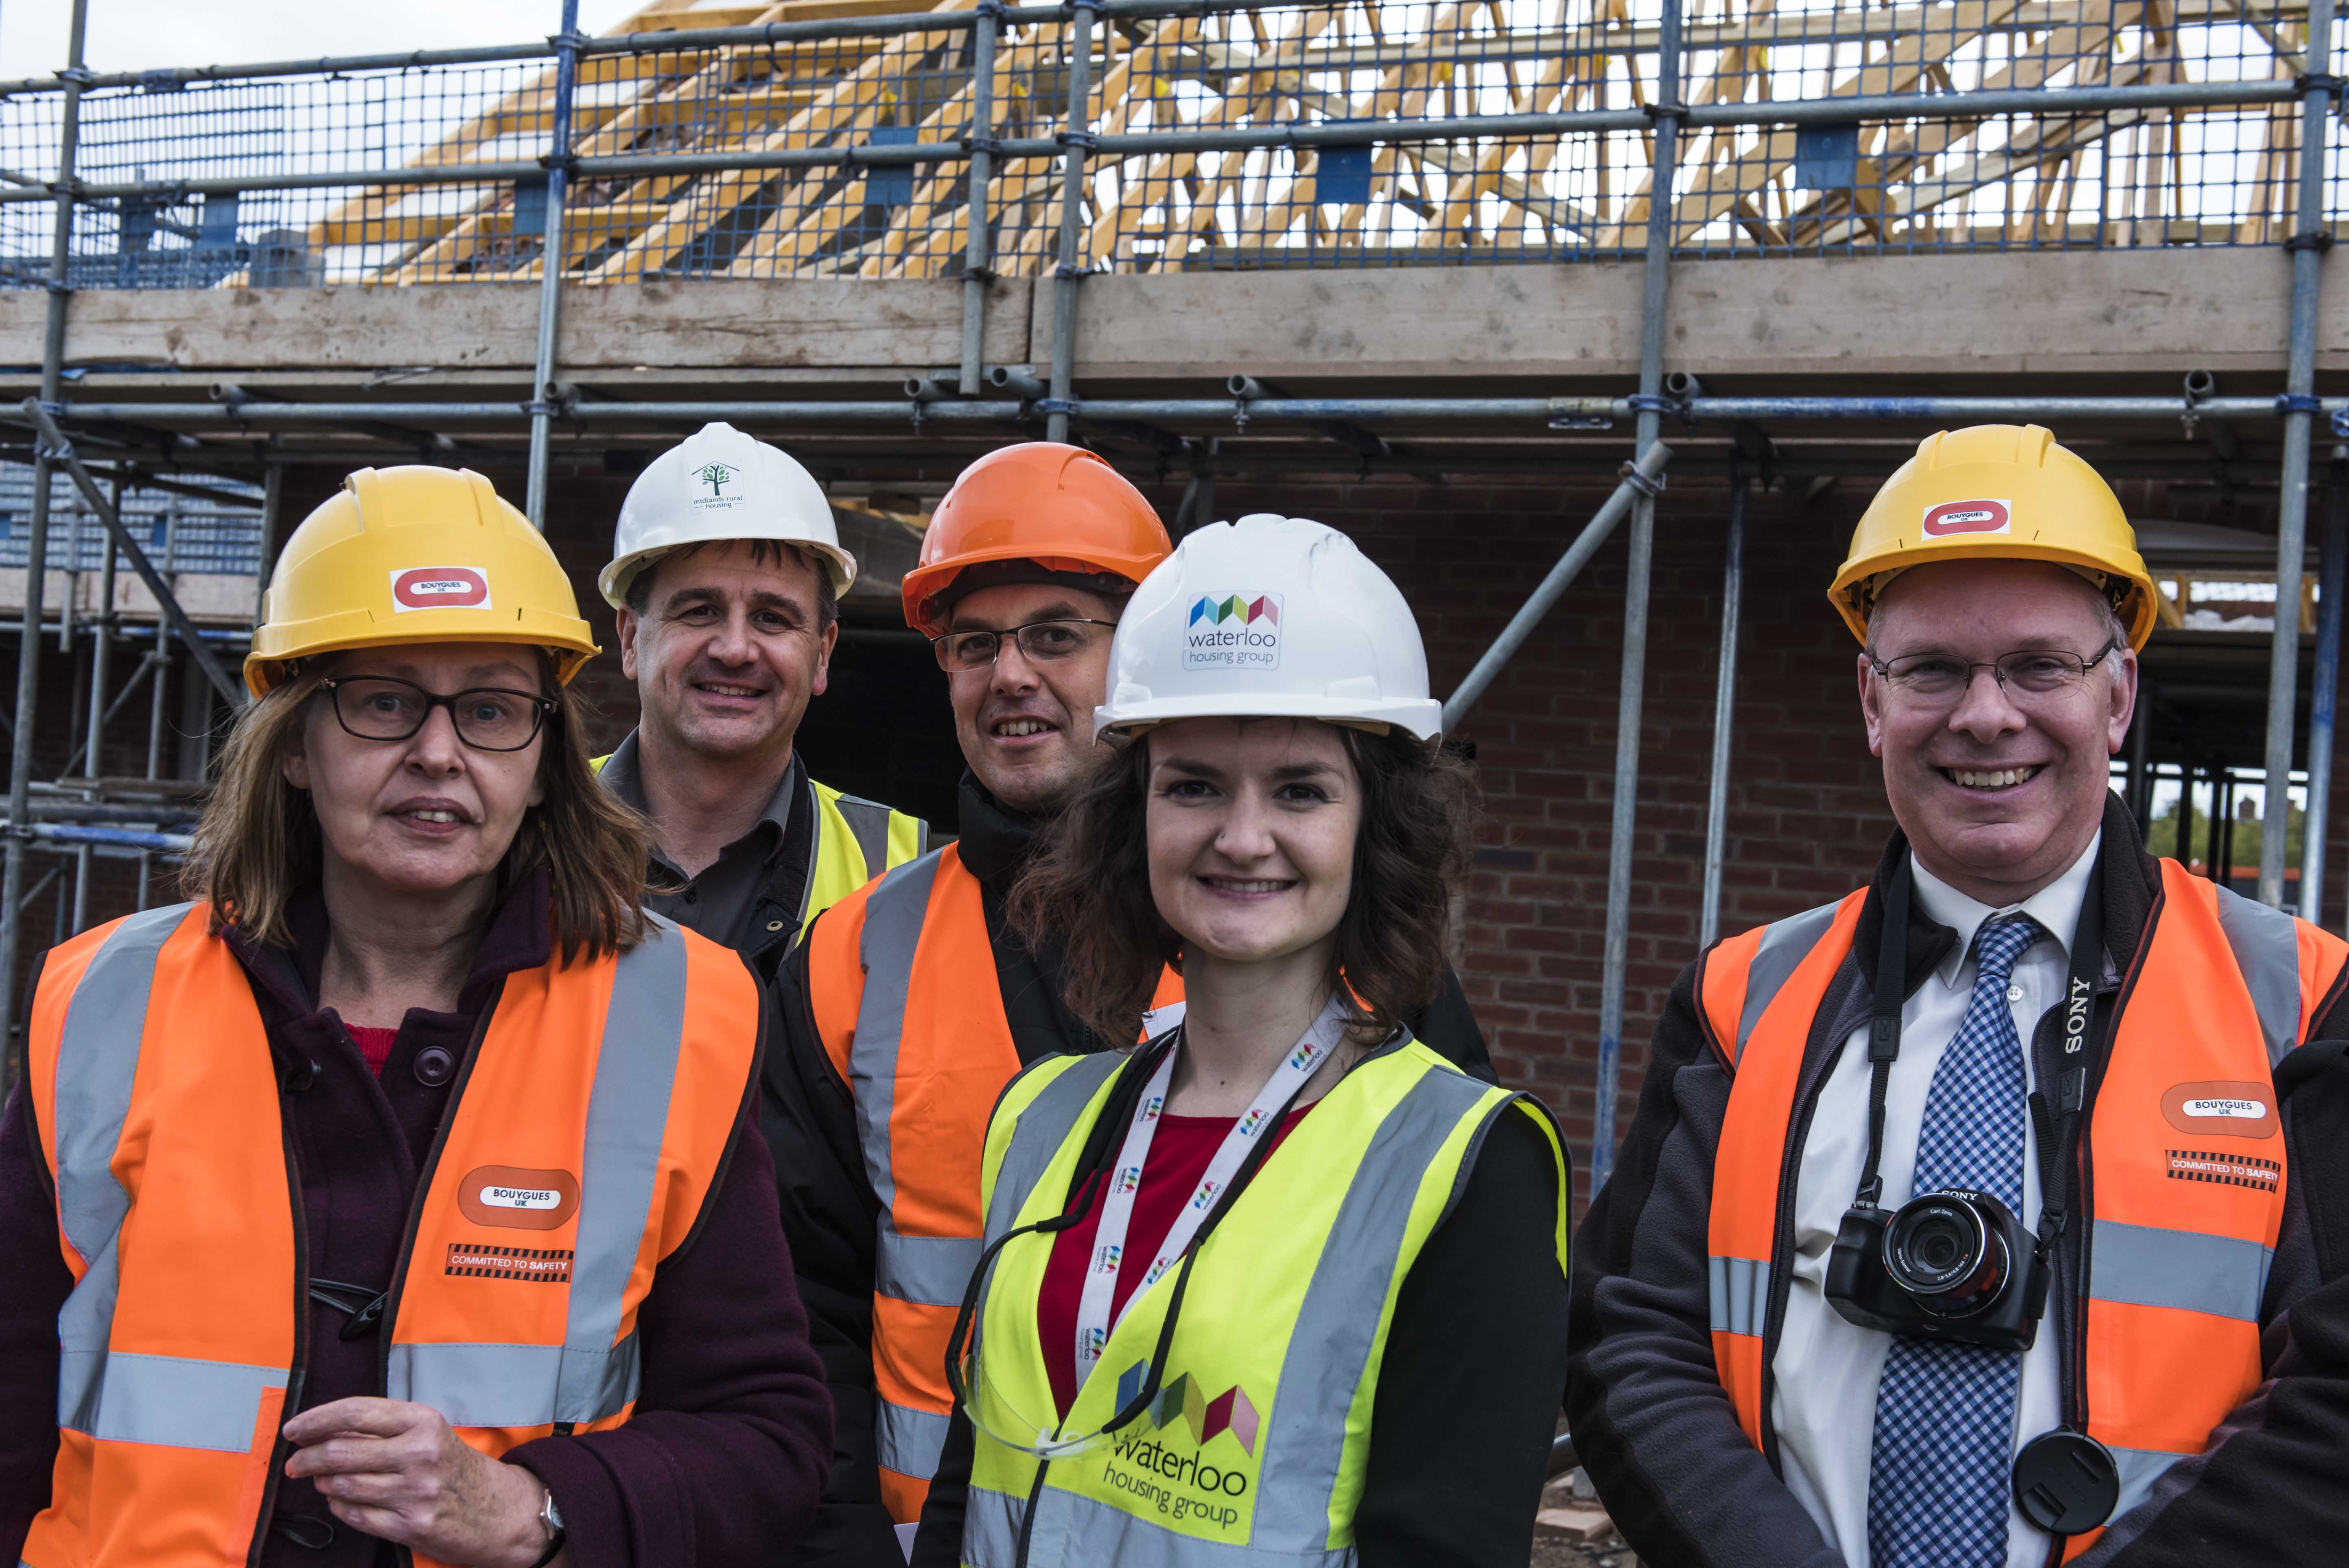 Councillors treated to preview of Warwickshire affordable housing development